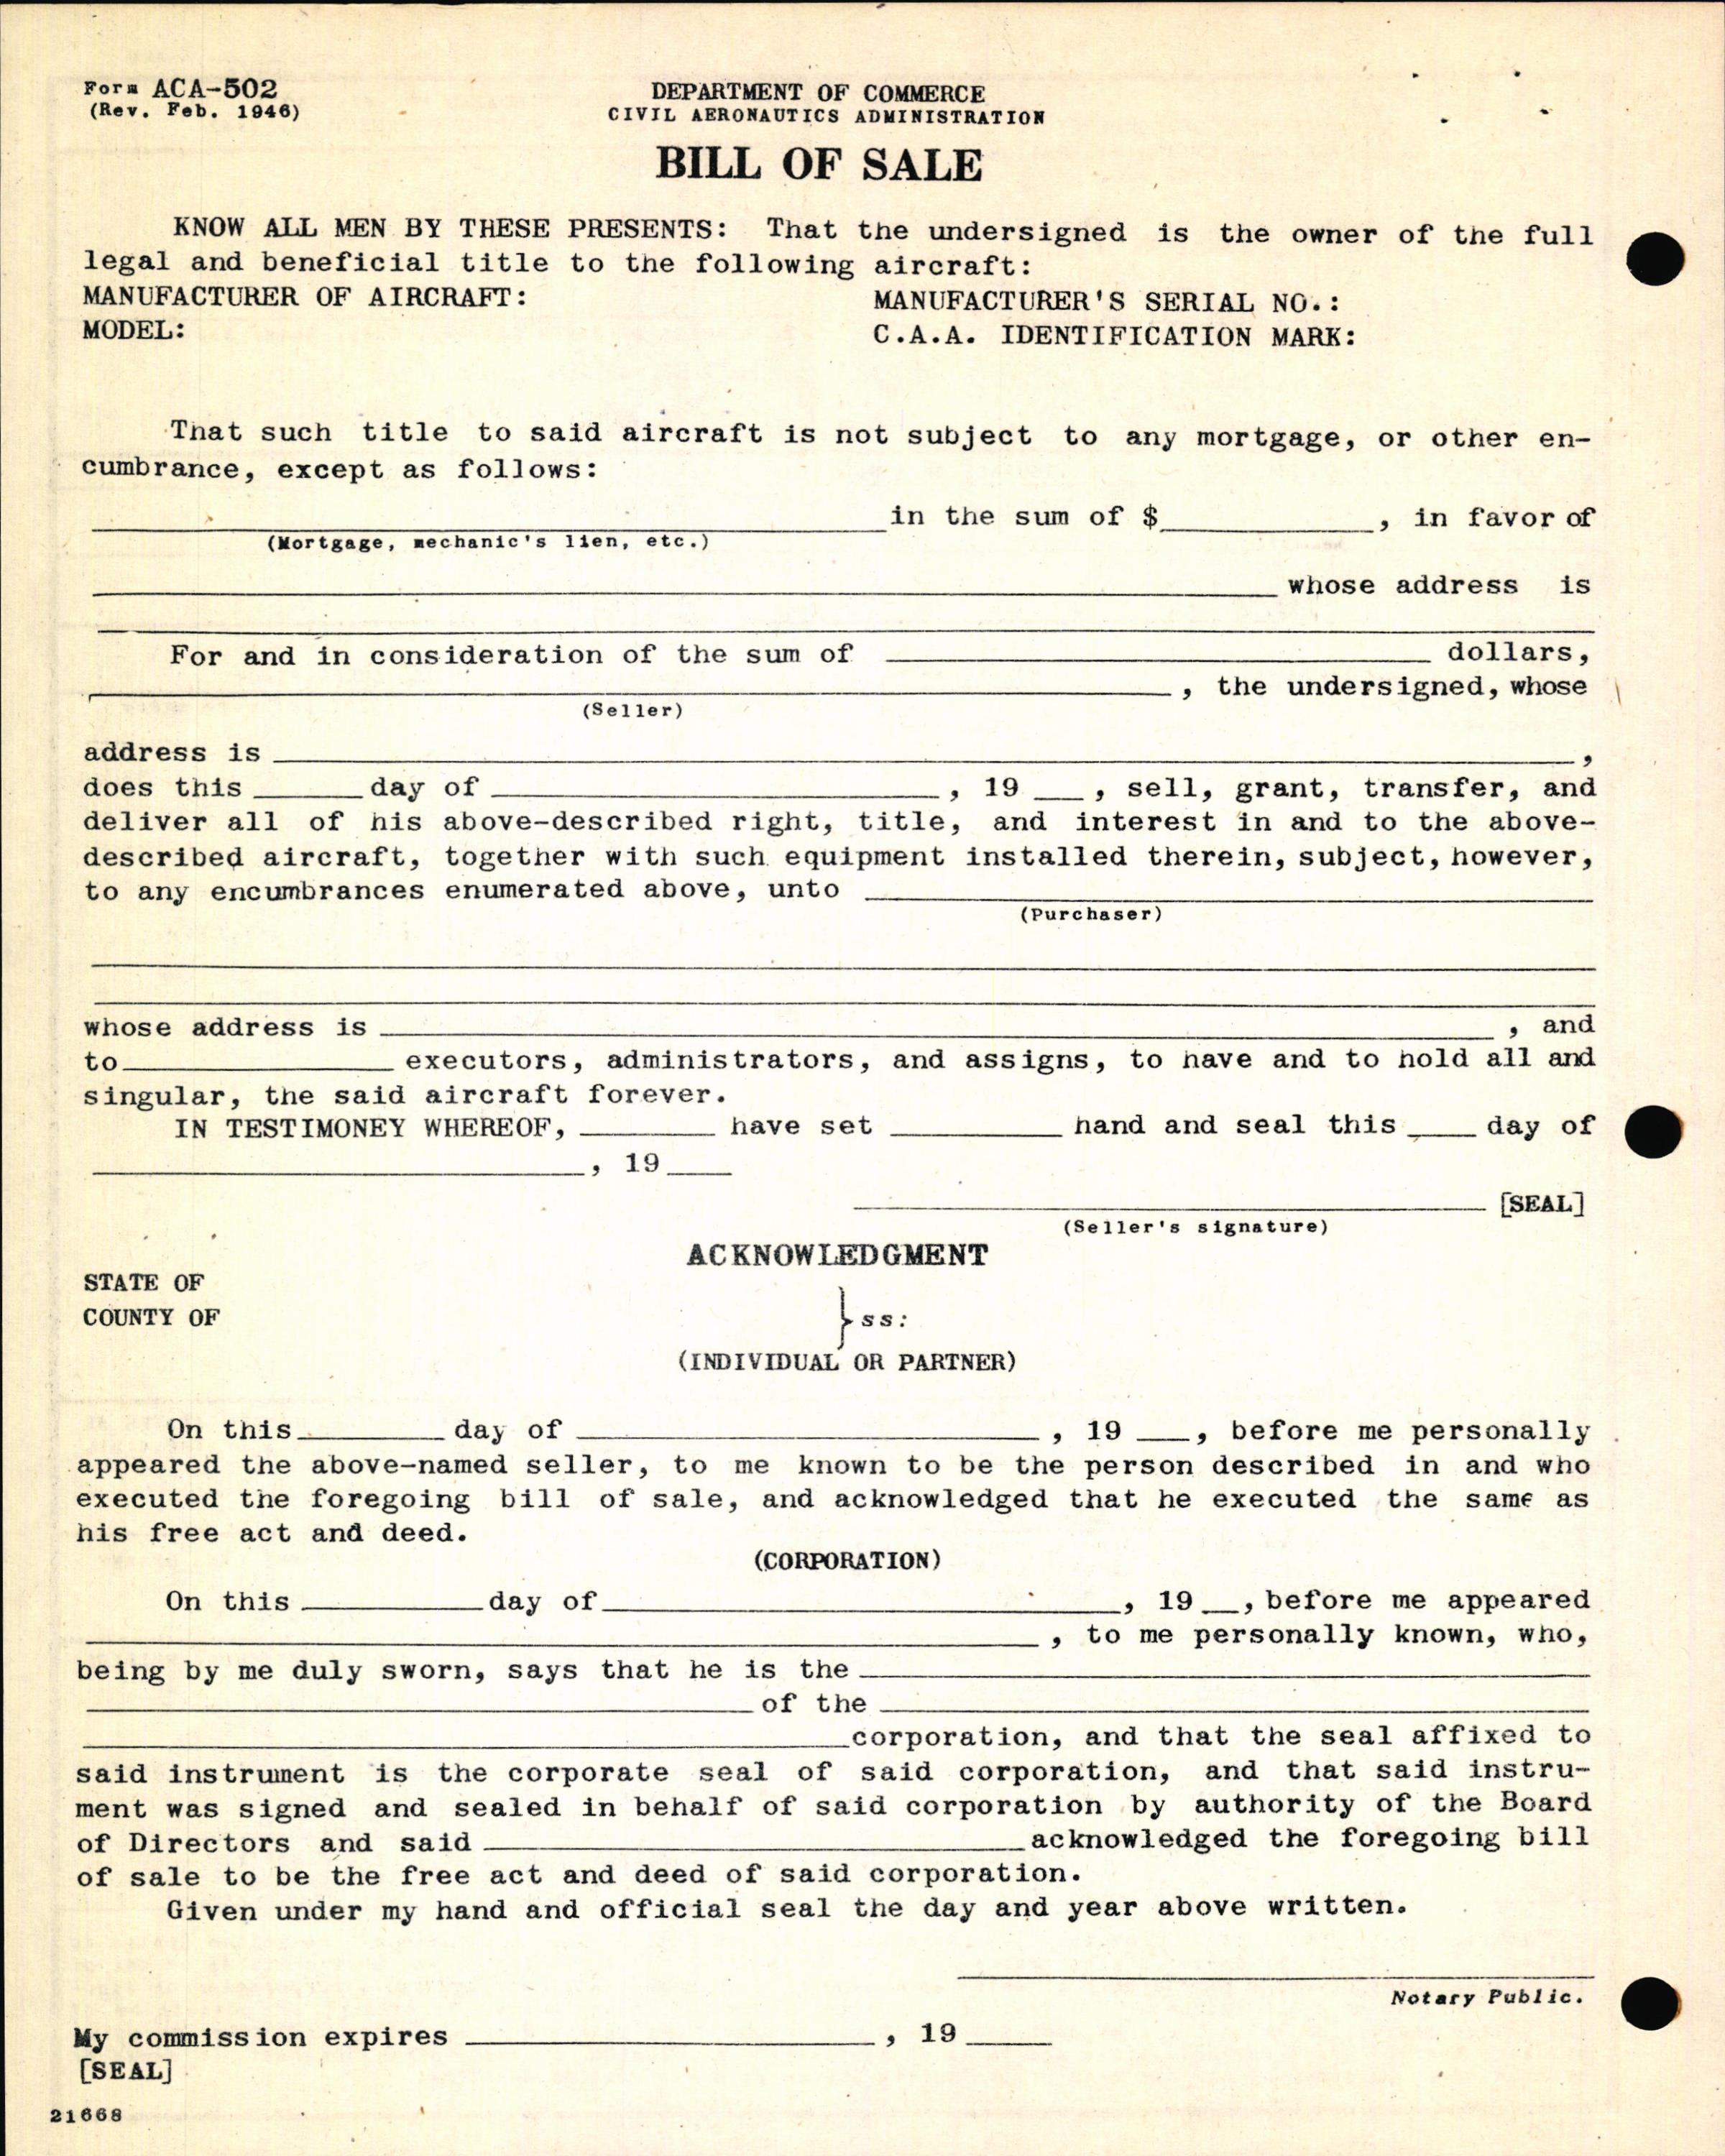 Sample page 4 from AirCorps Library document: Technical Information for Serial Number 1277